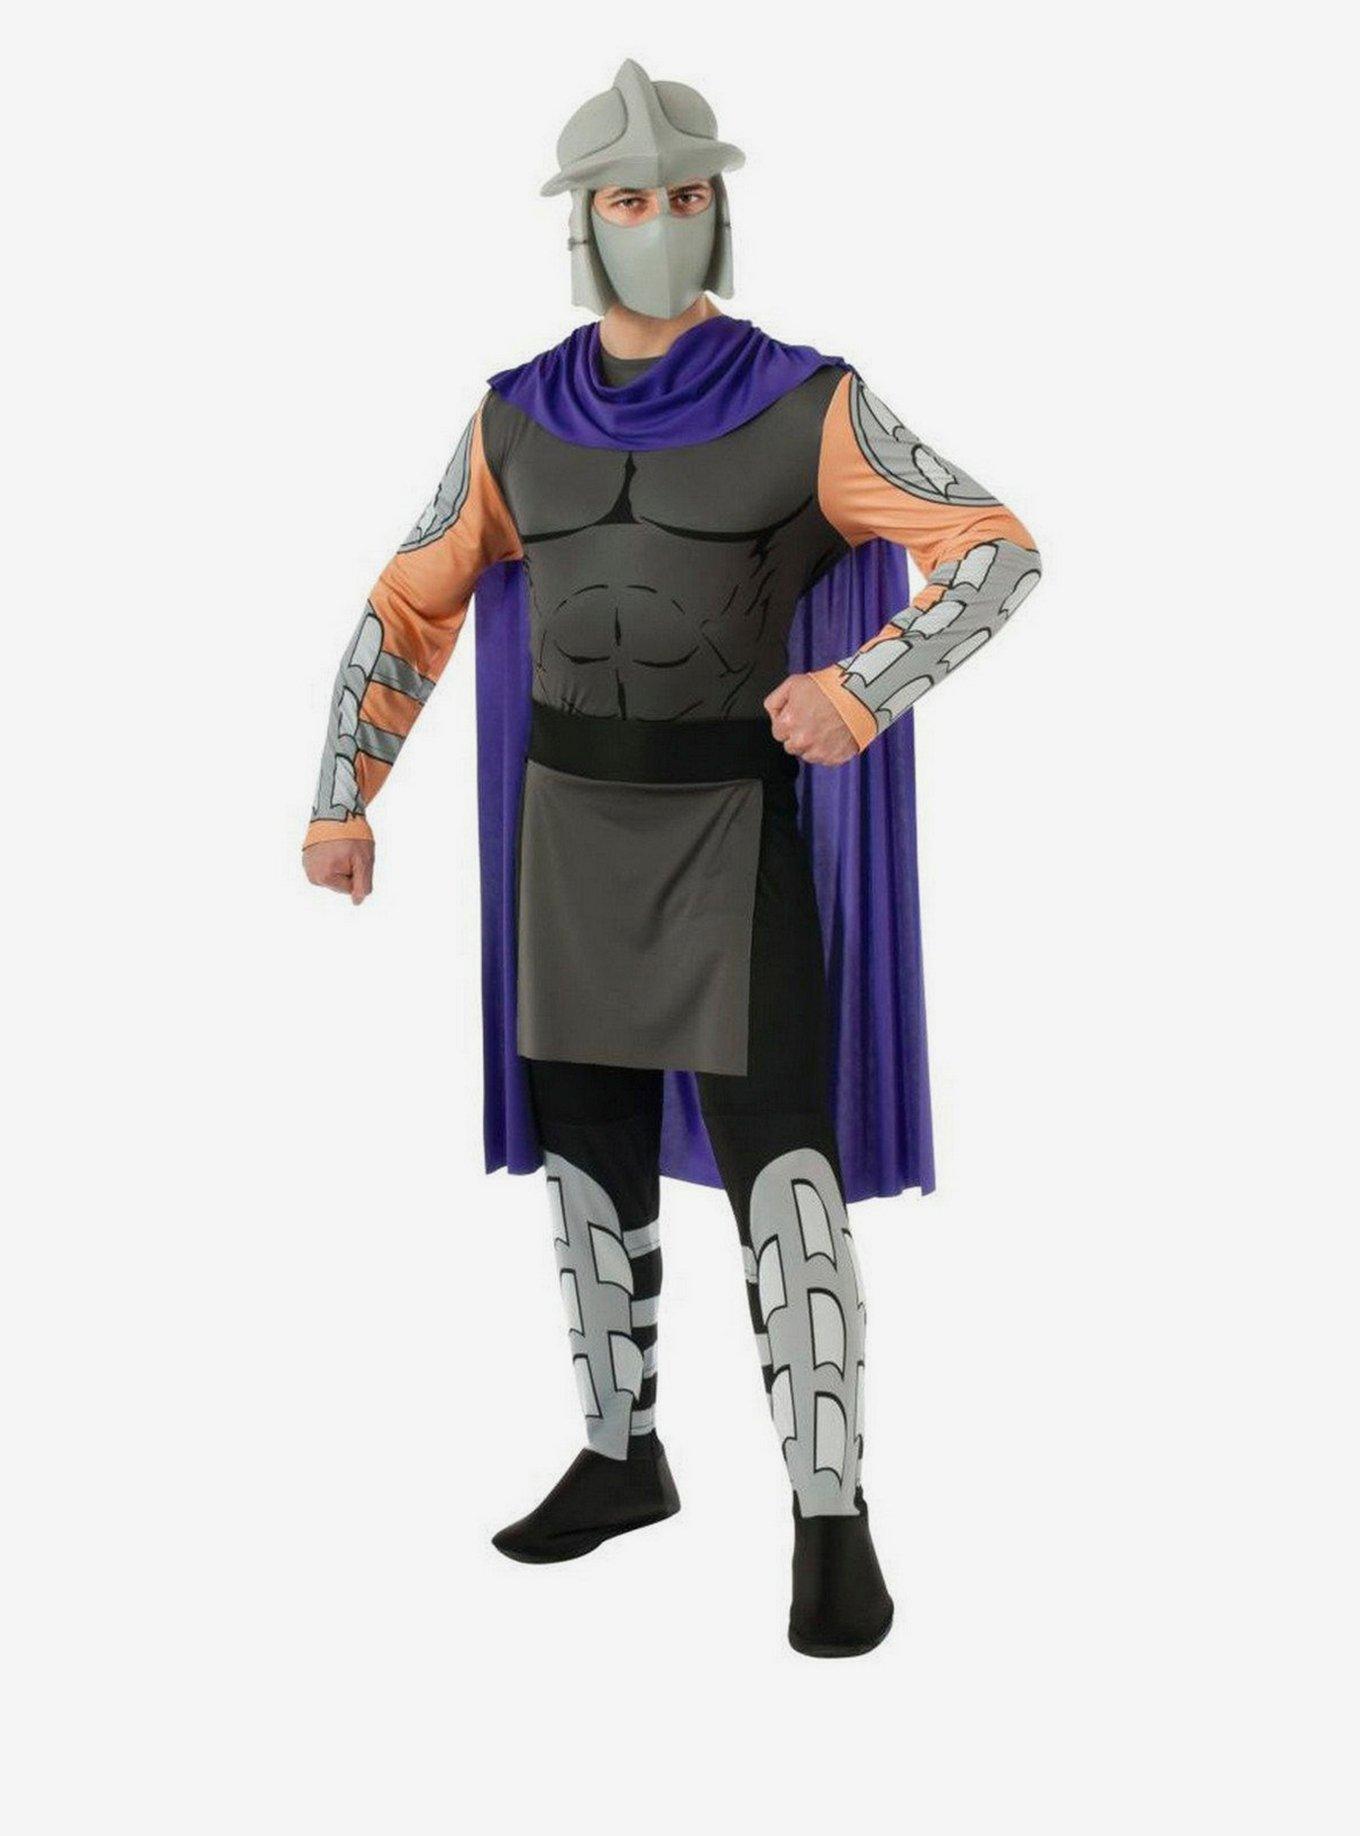 You may call me the Shredder A kitchen utensil? : r/TMNT